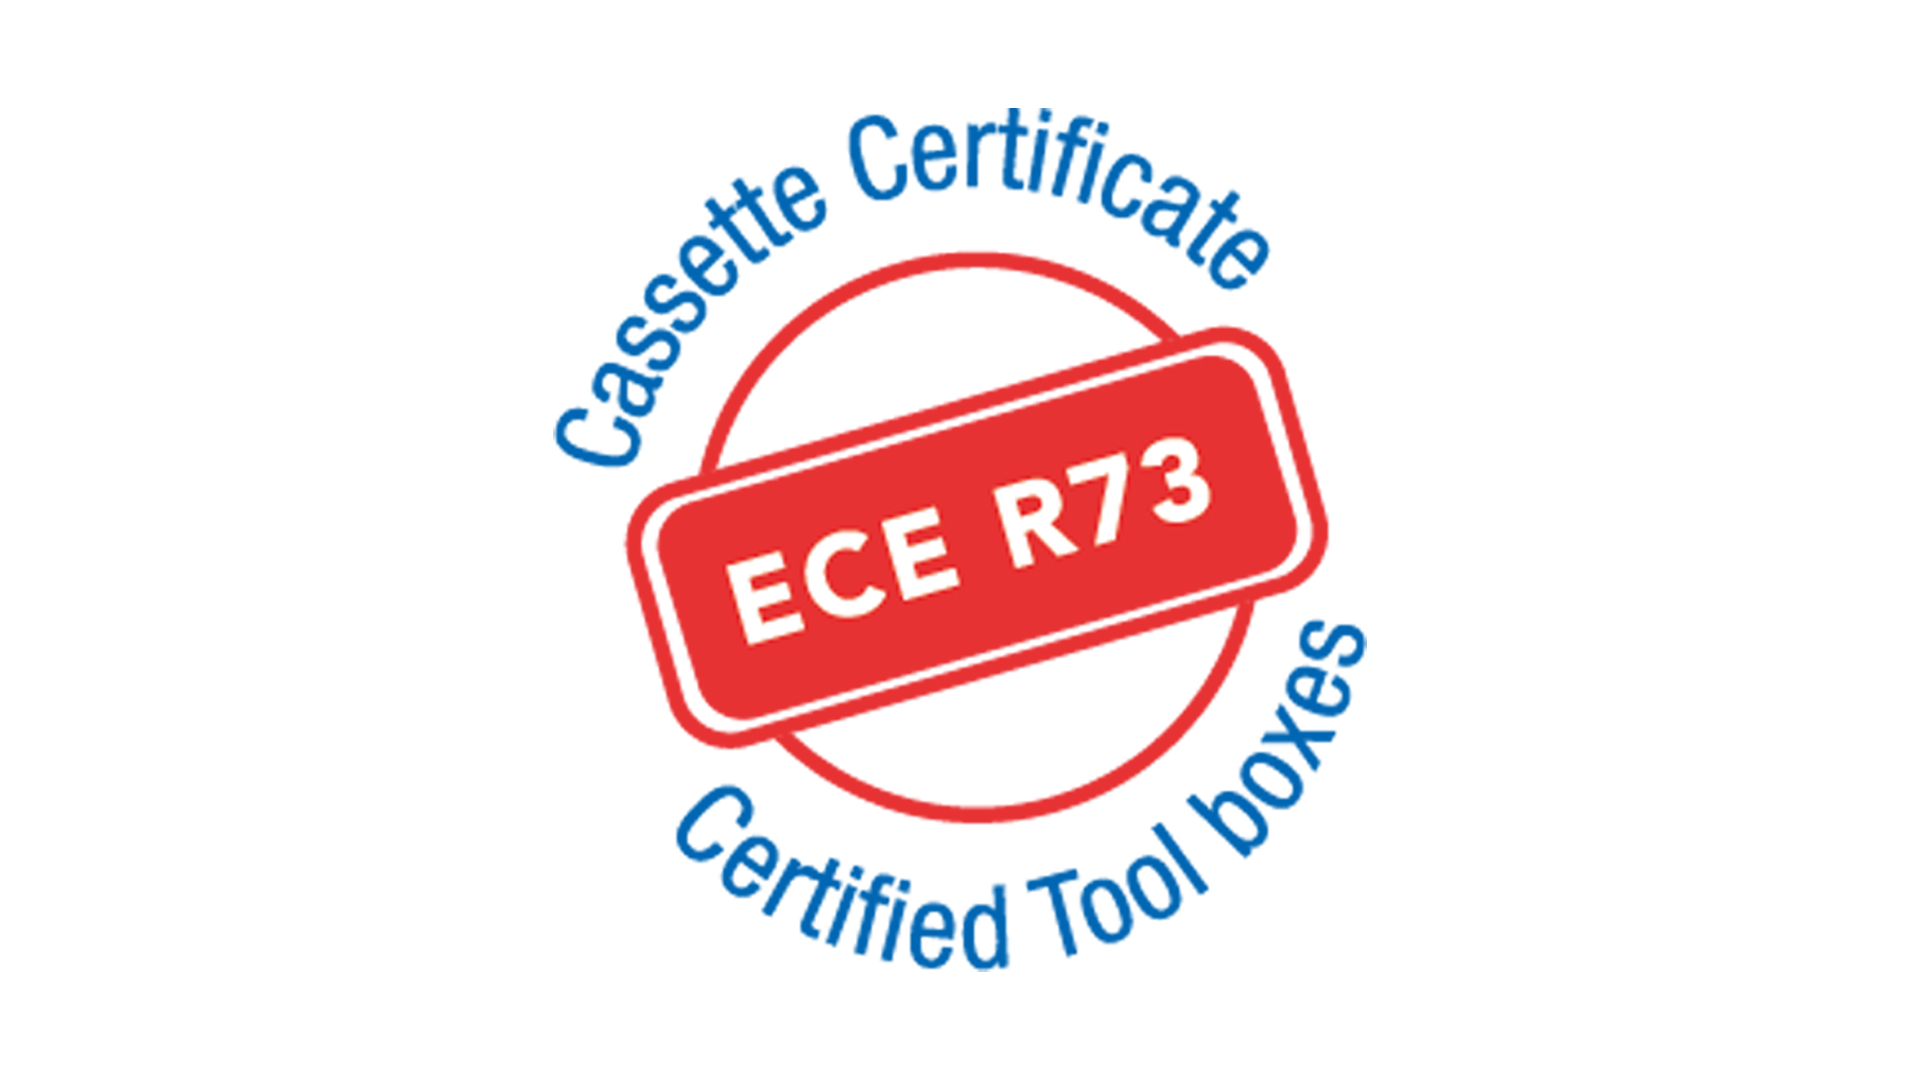 We have obtained ECE R73 certification